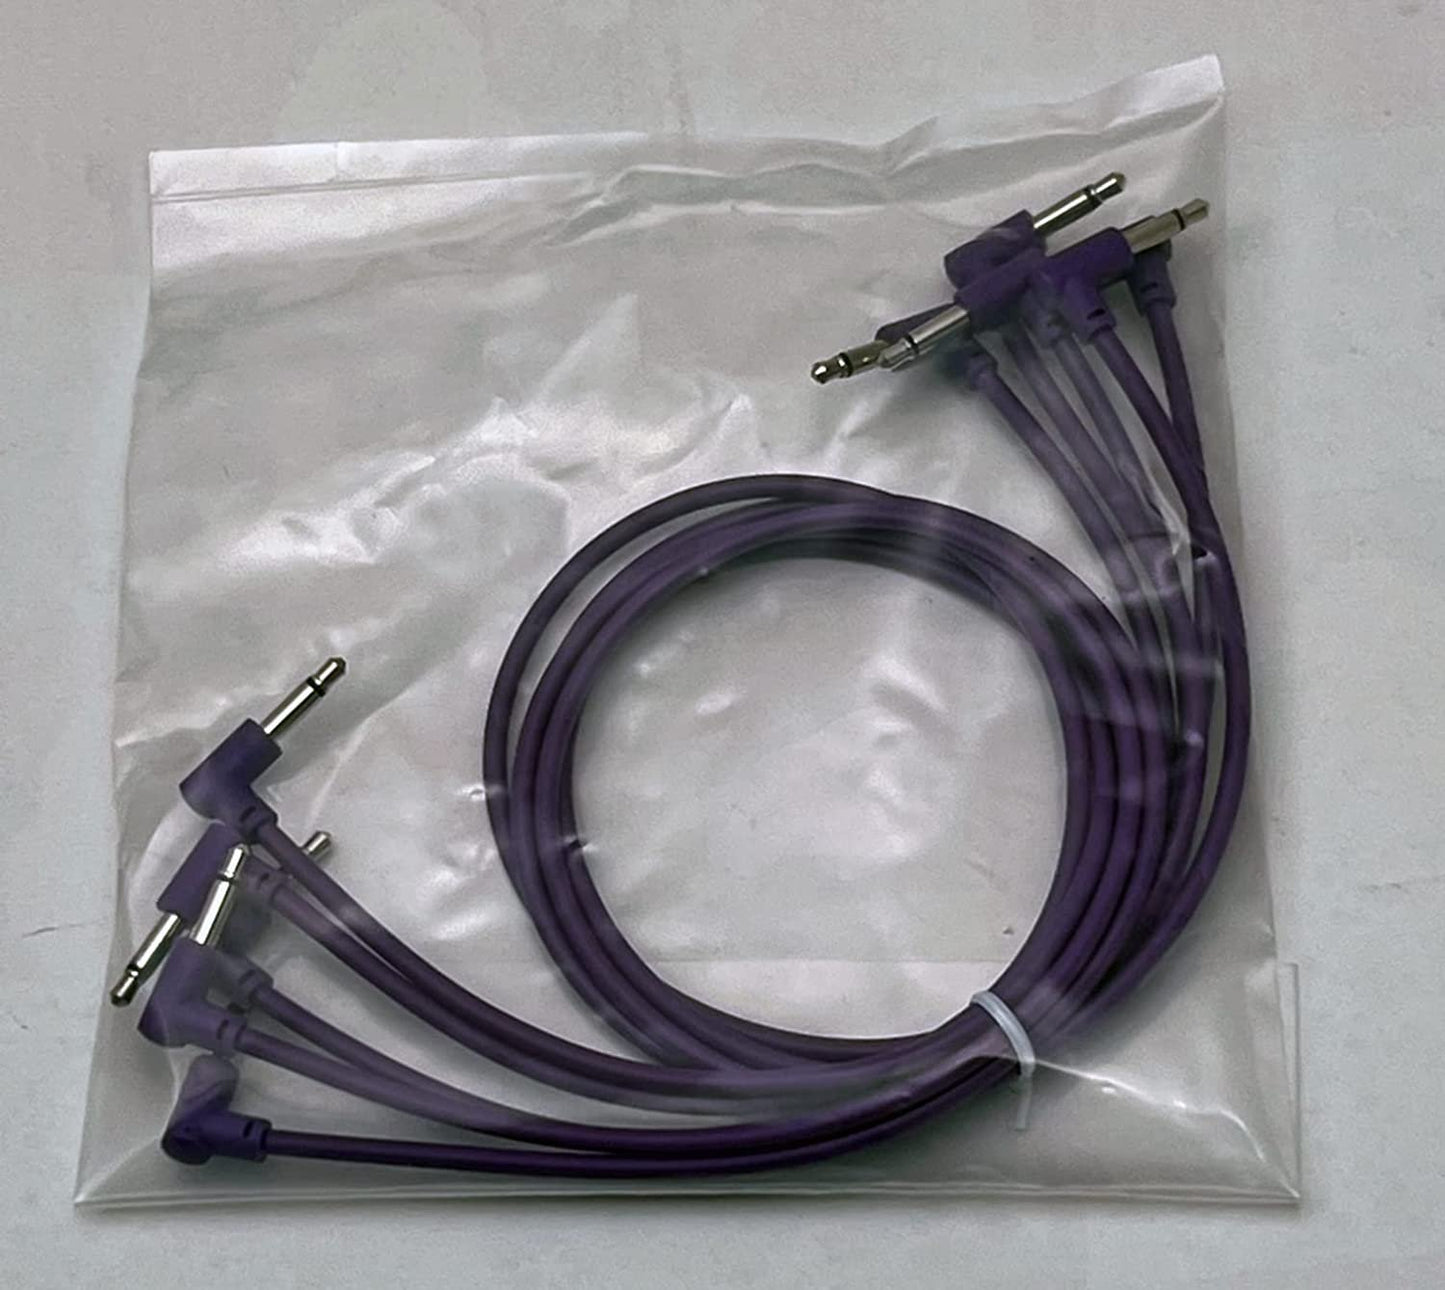 Luigis Modular M-PAR Right Angled Eurorack Patch Cables - Package of 5 Purple Cables, 18" (45 cm)